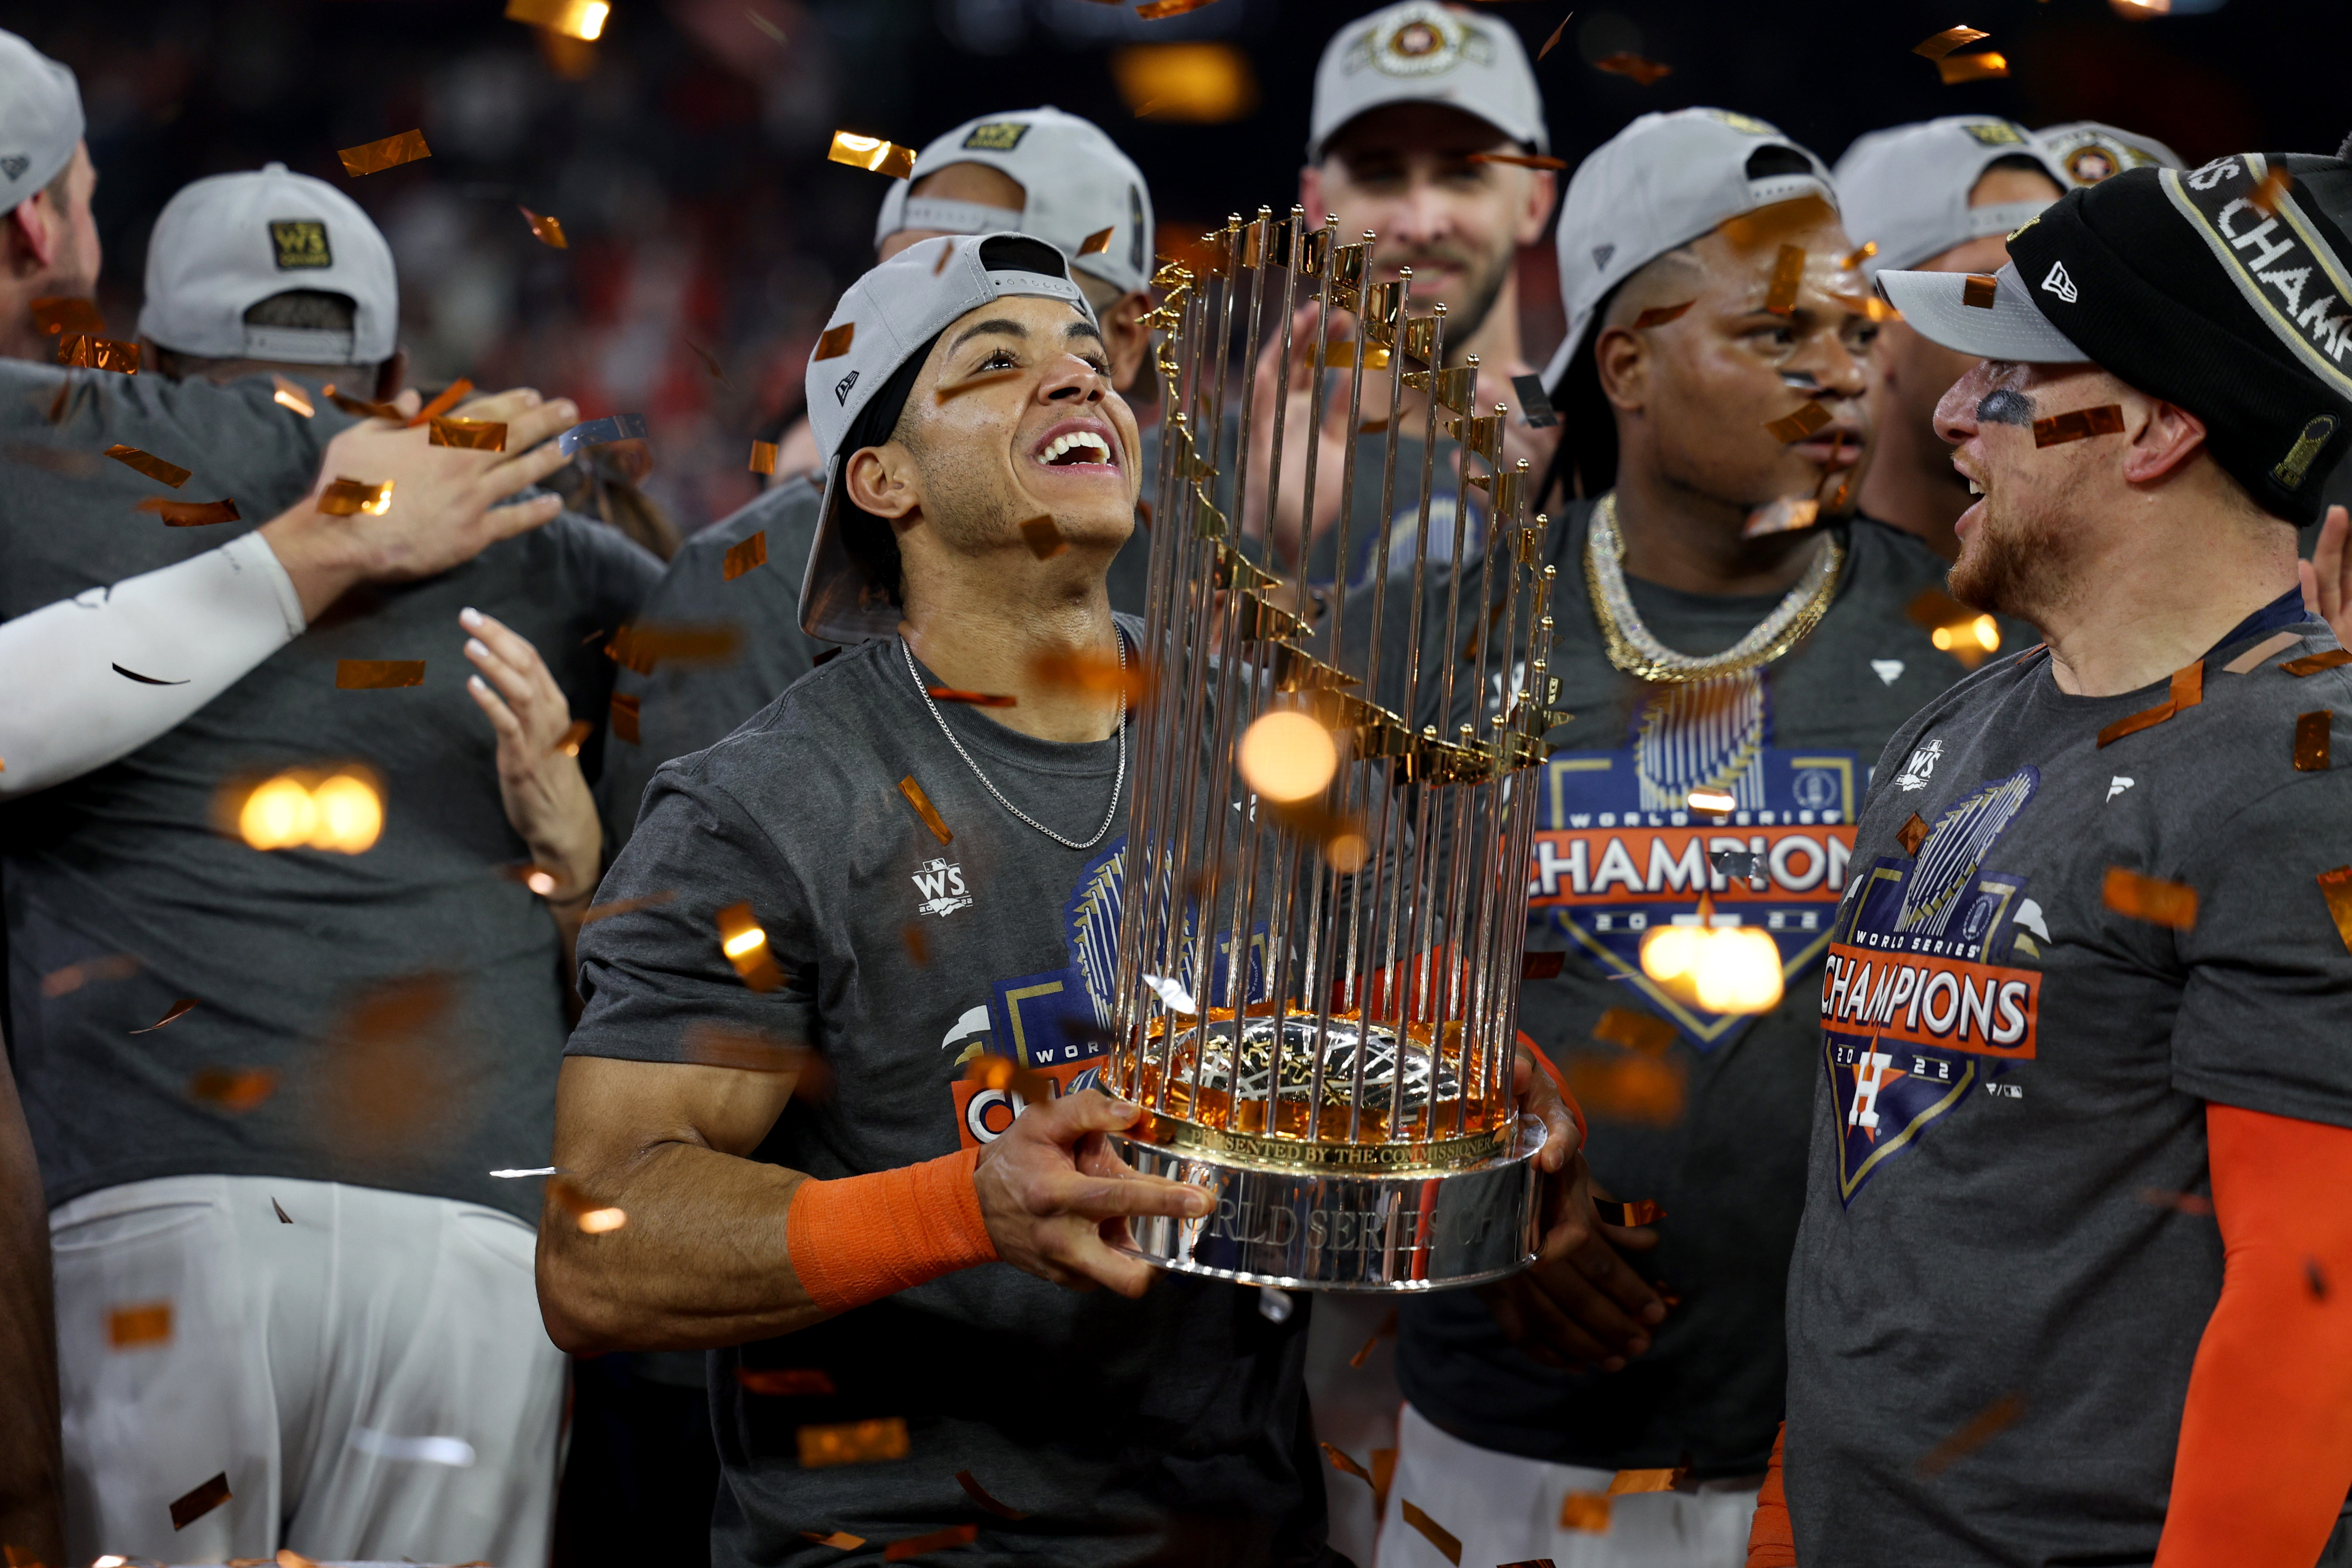 Shortstop Jeremy Pena (C) of the Houston Astros celebrates with the Commissioner's Trophy after his team beat the Philadelphia Phillies 4-1 in Game 6 of the MLB World Series at Minute Maid Park in Houston, Texas, November 5, 2022. /CFP